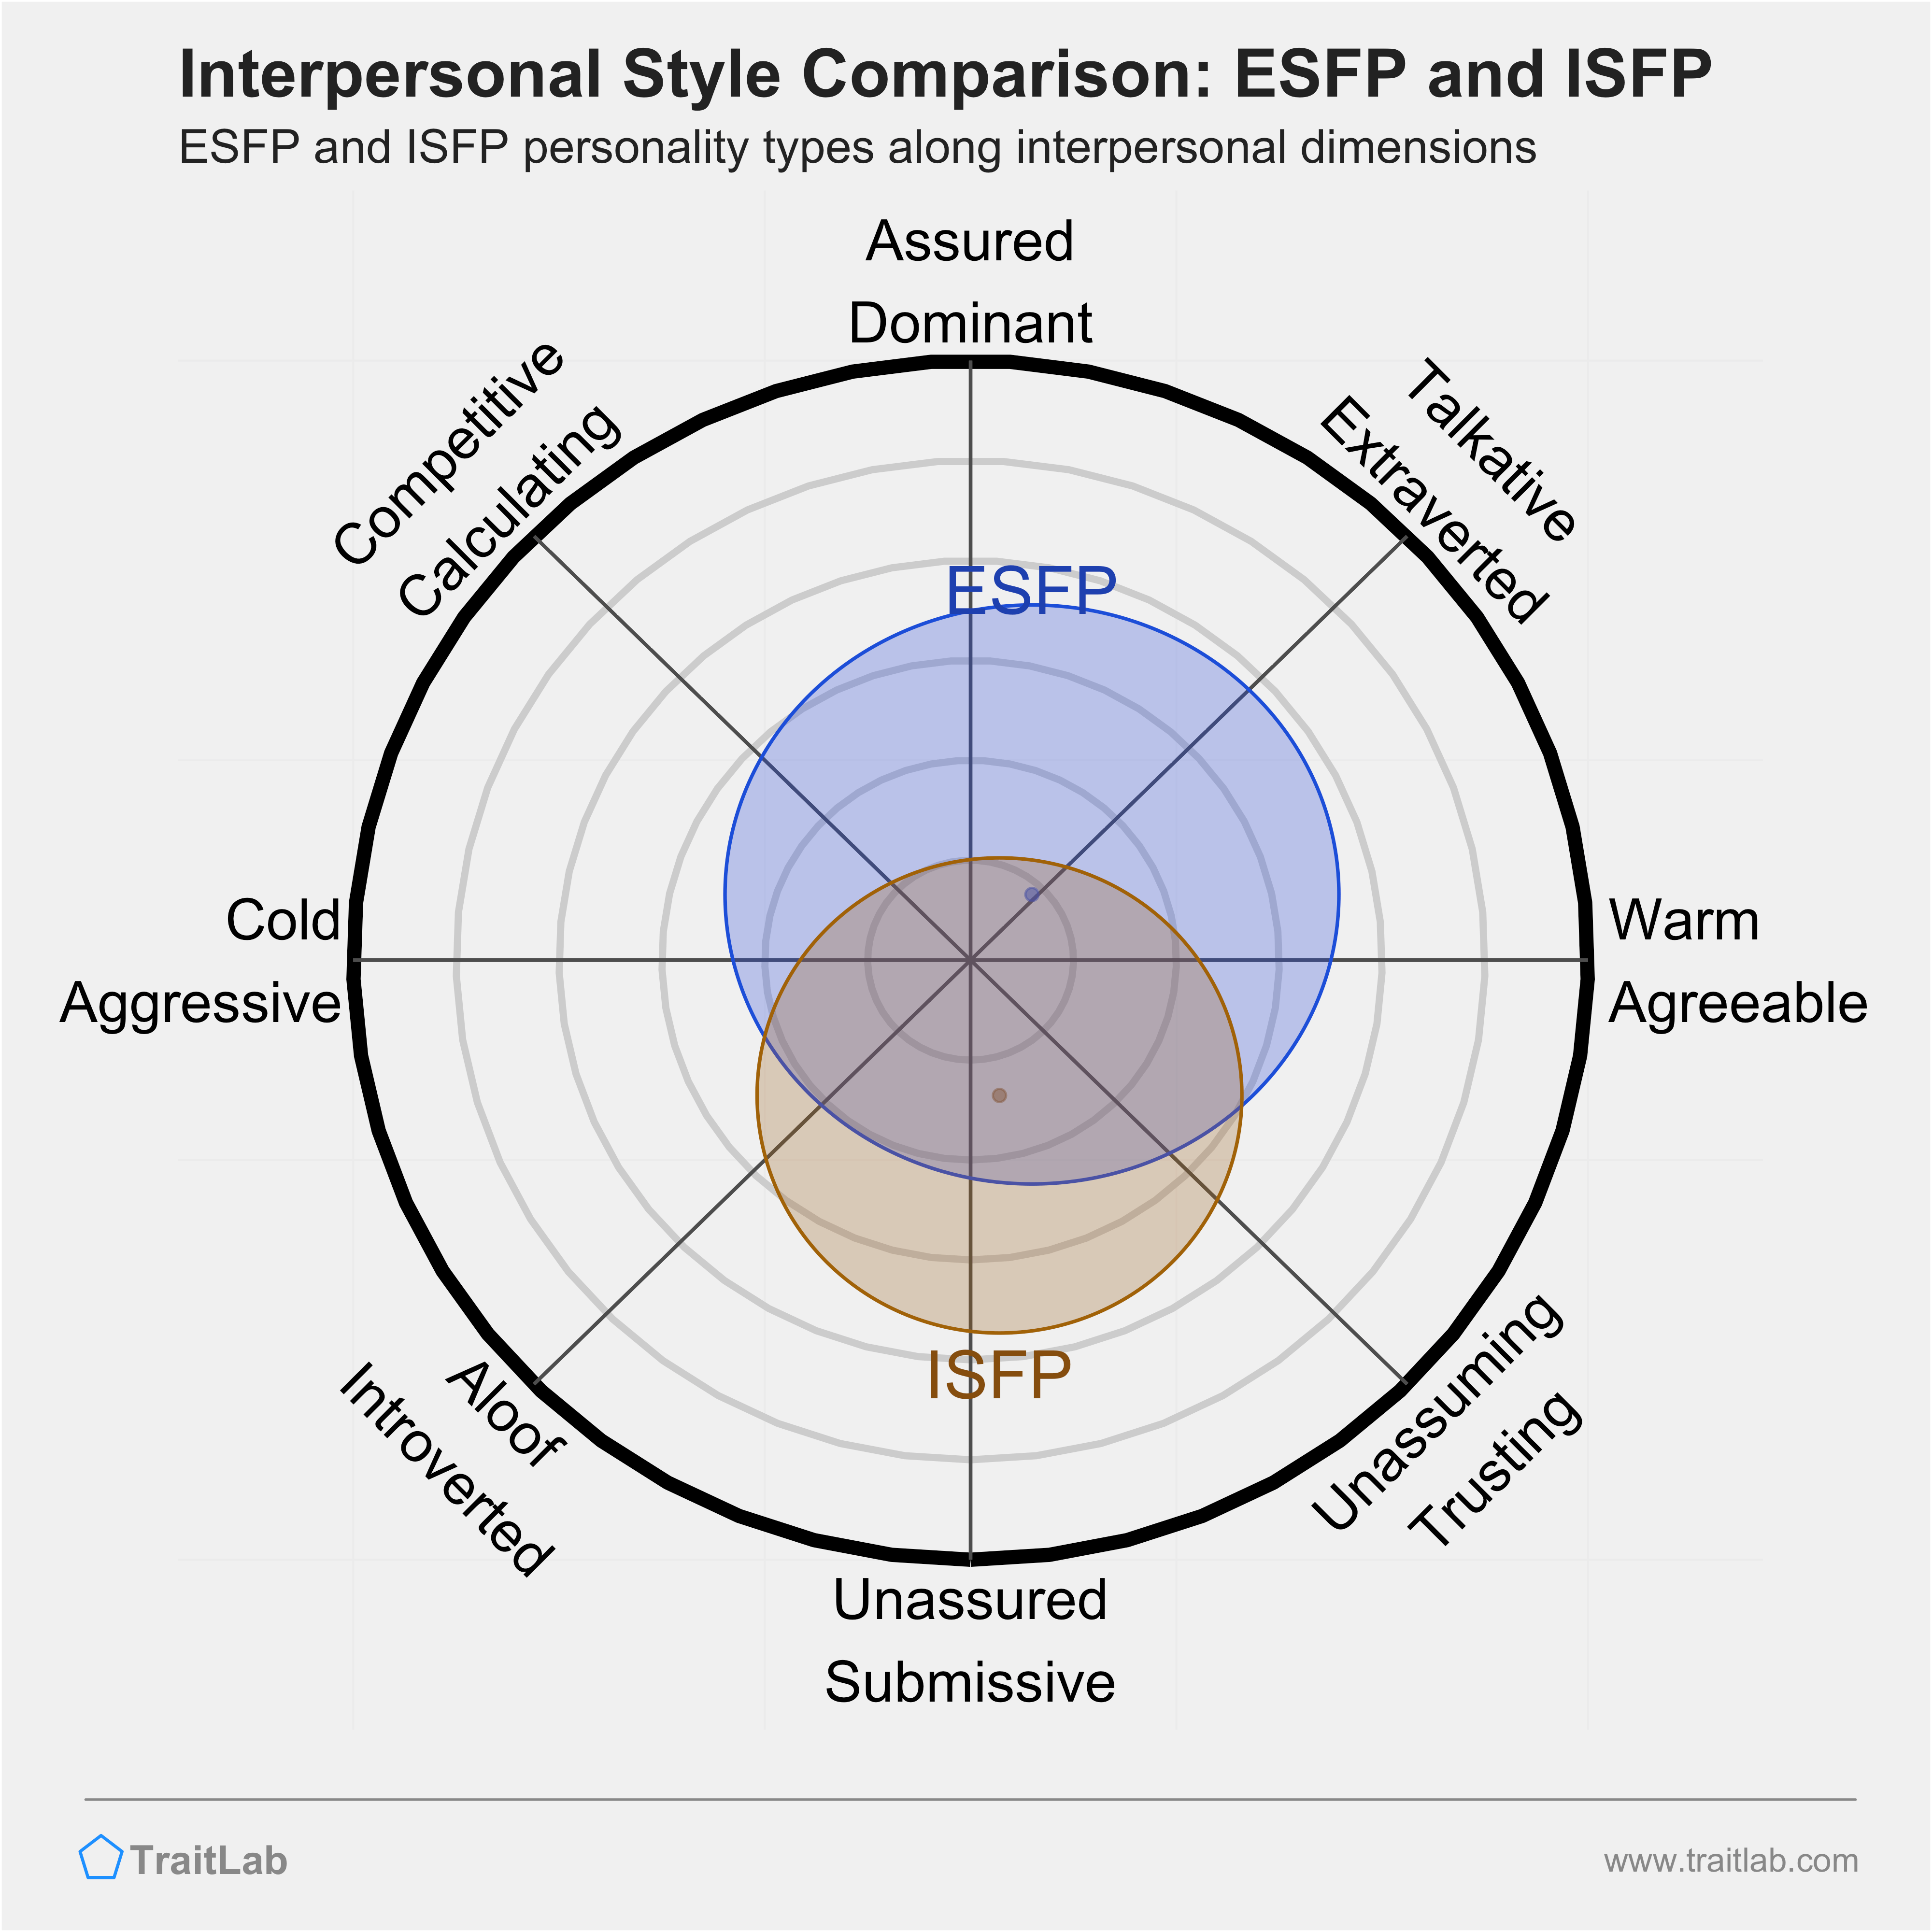 ESFP and ISFP comparison across interpersonal dimensions